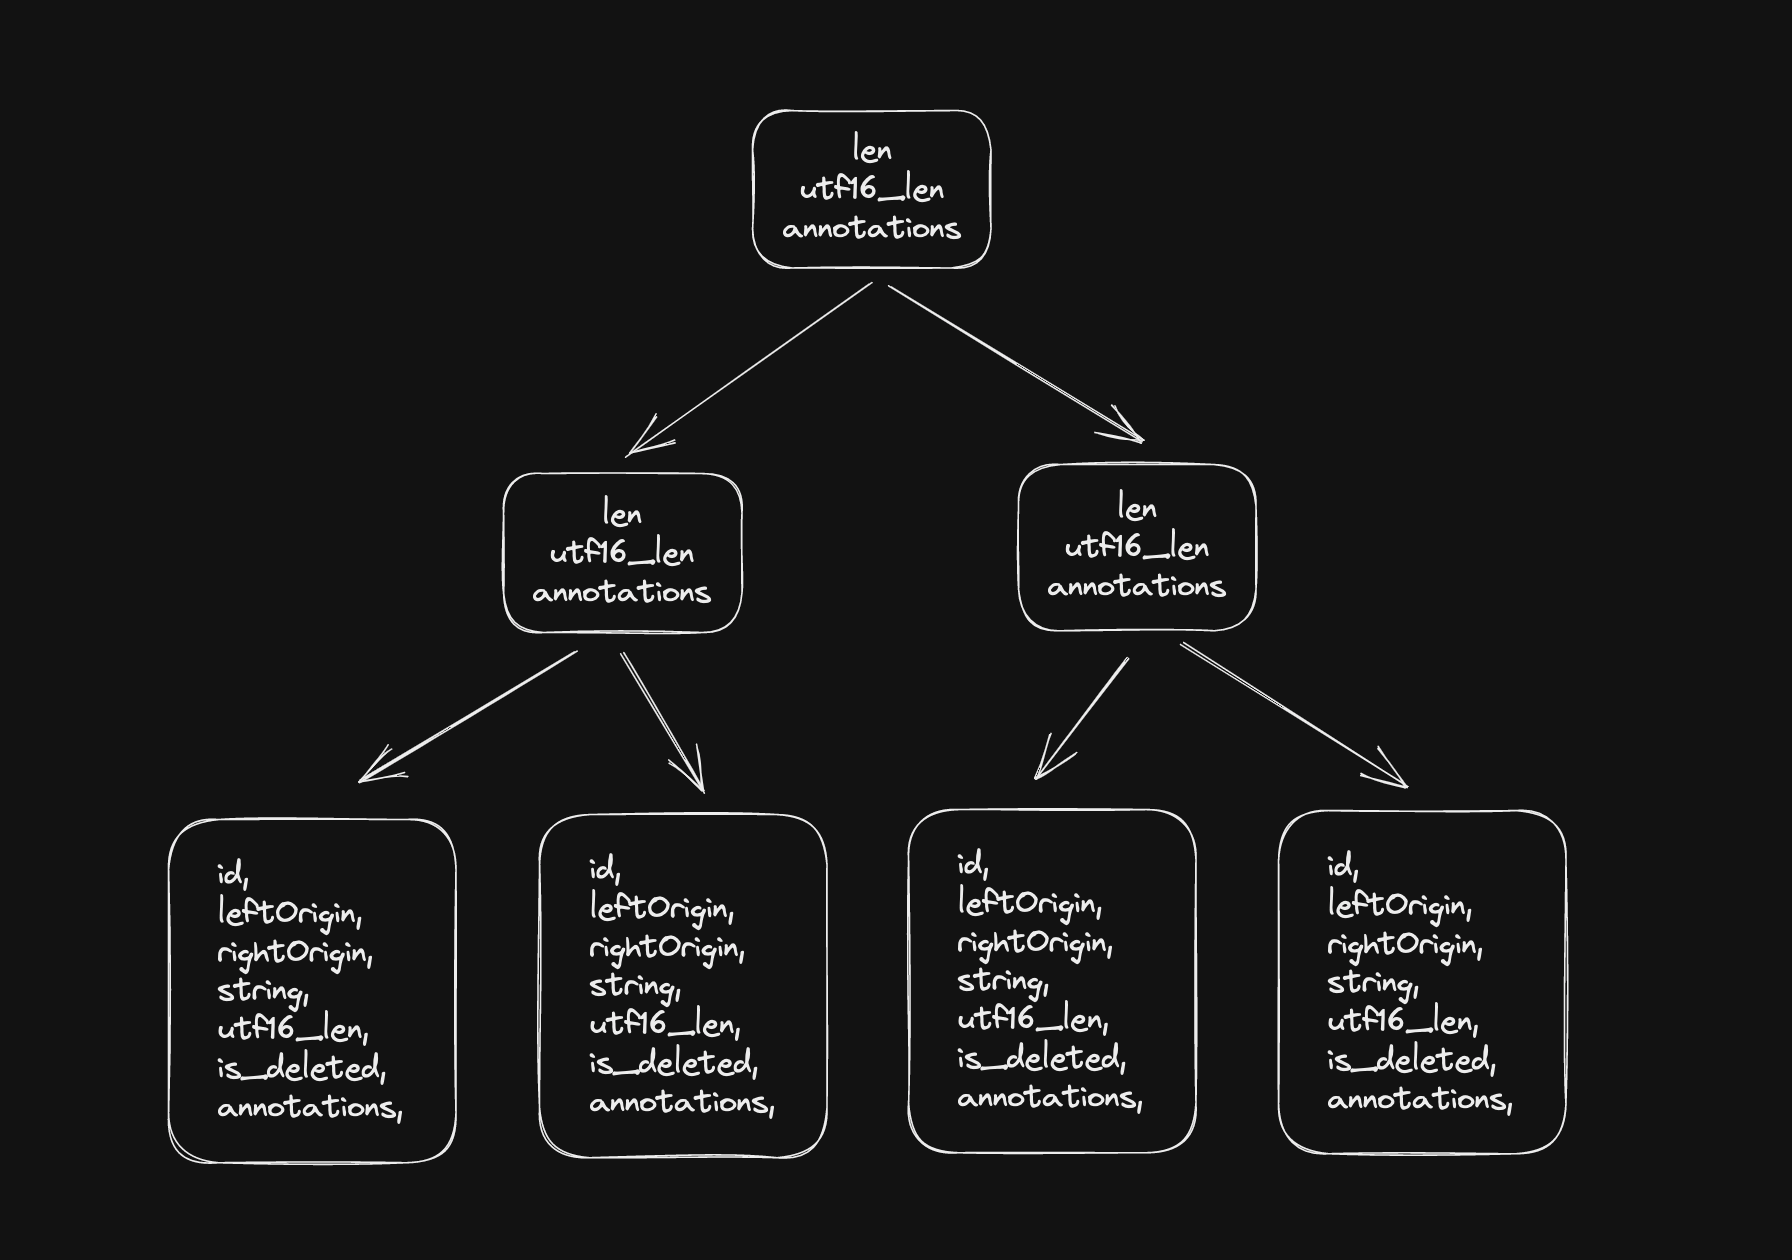 The cached content inside B-Tree